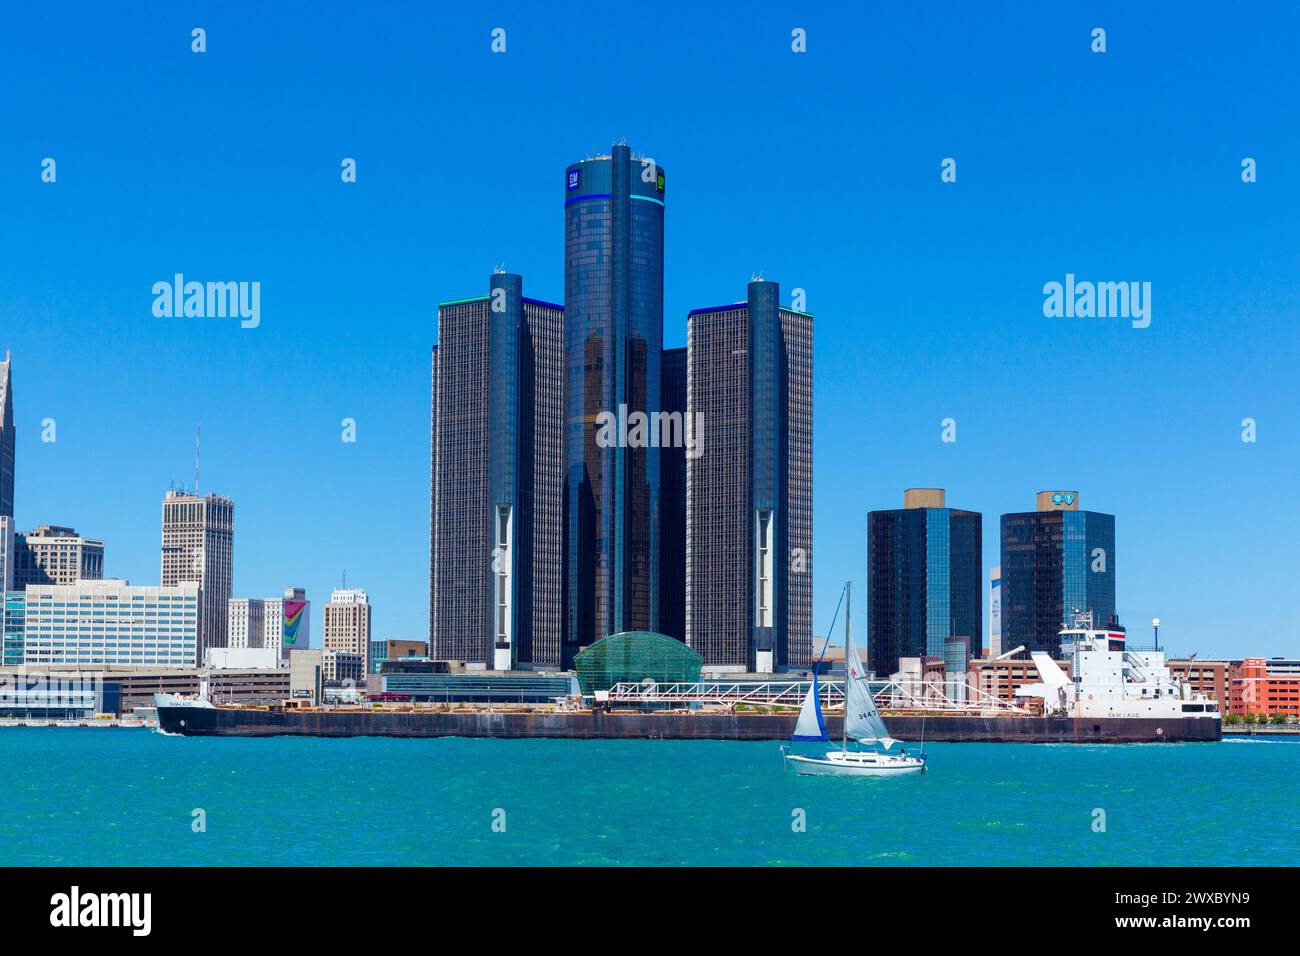 The Renaissance Center in Detroit, Michigan, USA, seen from the Detroit River. It is the location of the General Motors world headquarters, a Marriott Stock Photo